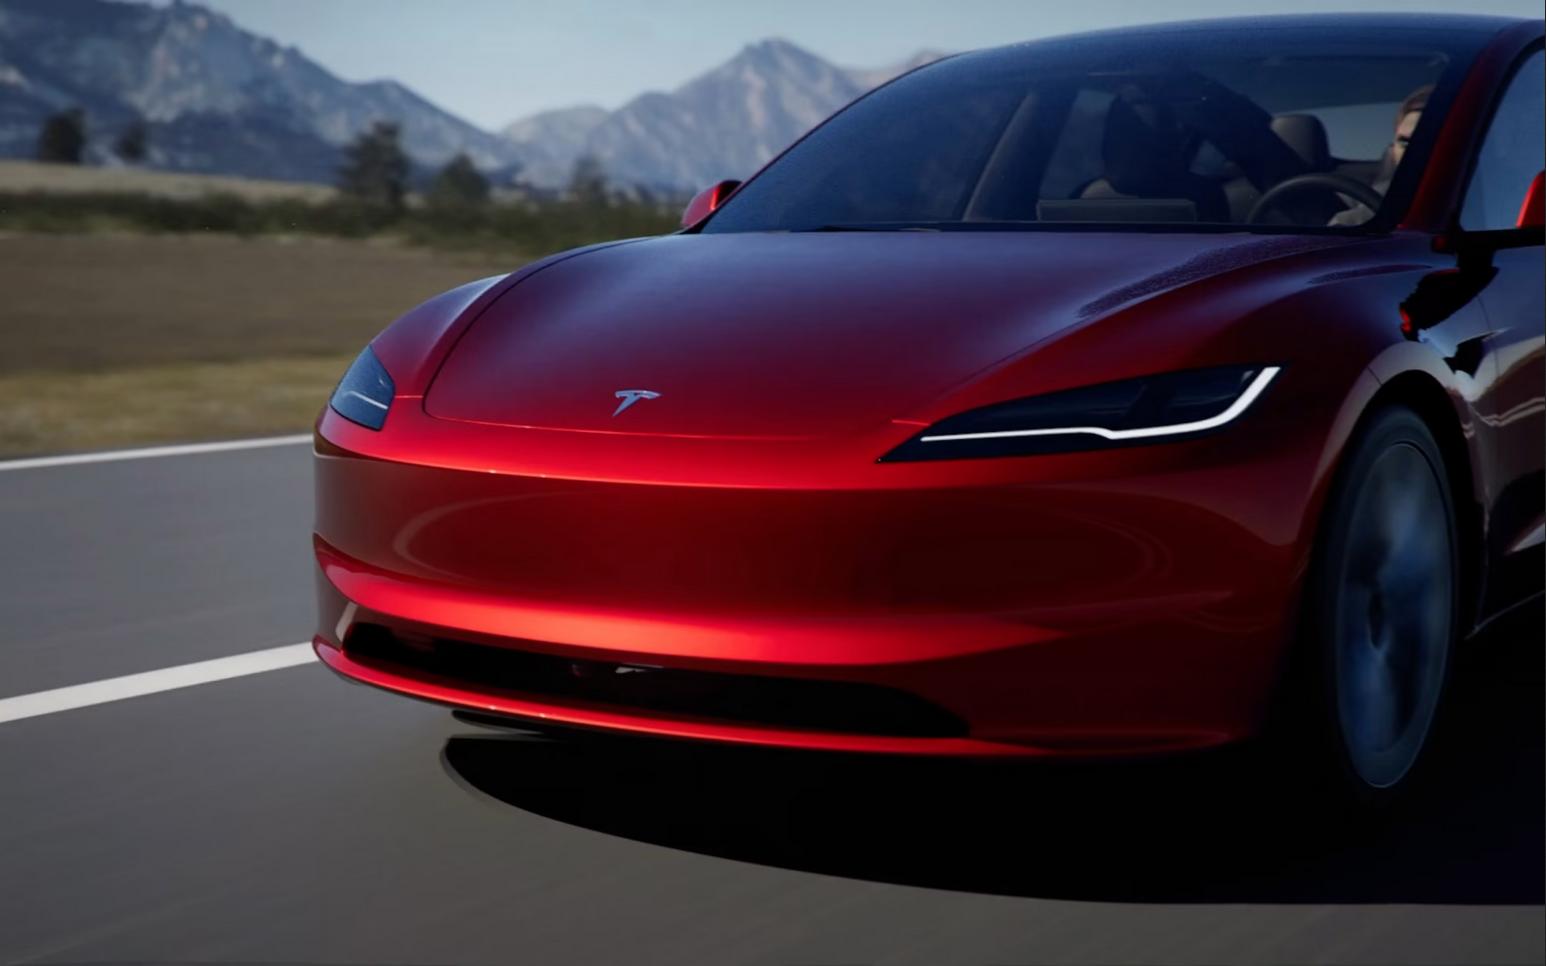 Tesla launches revamped Model 3 Highland